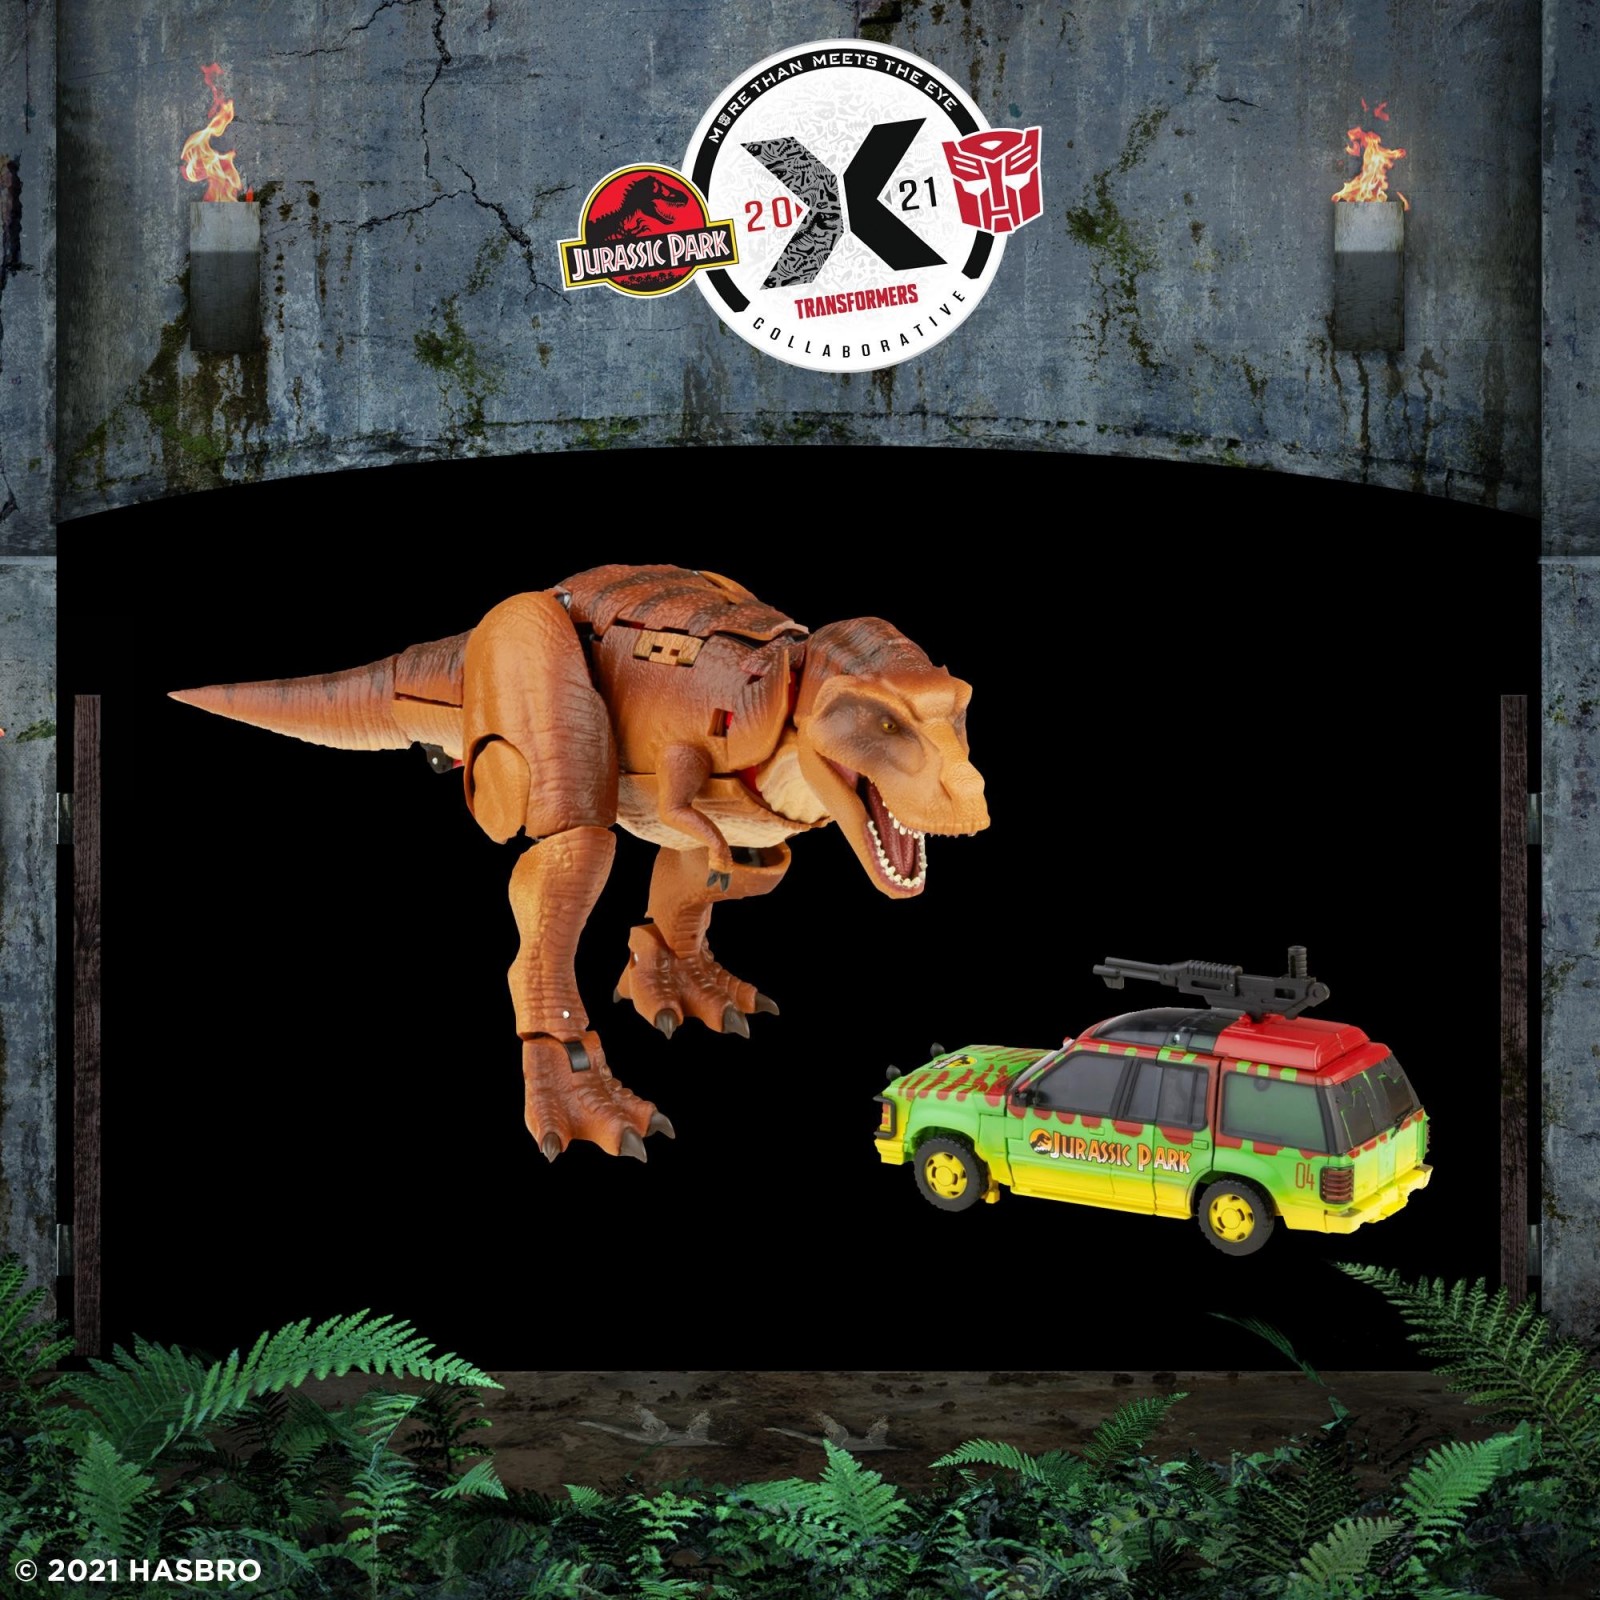 Jurassic Park x Transformers Crossover Revealed and Available on Amazon